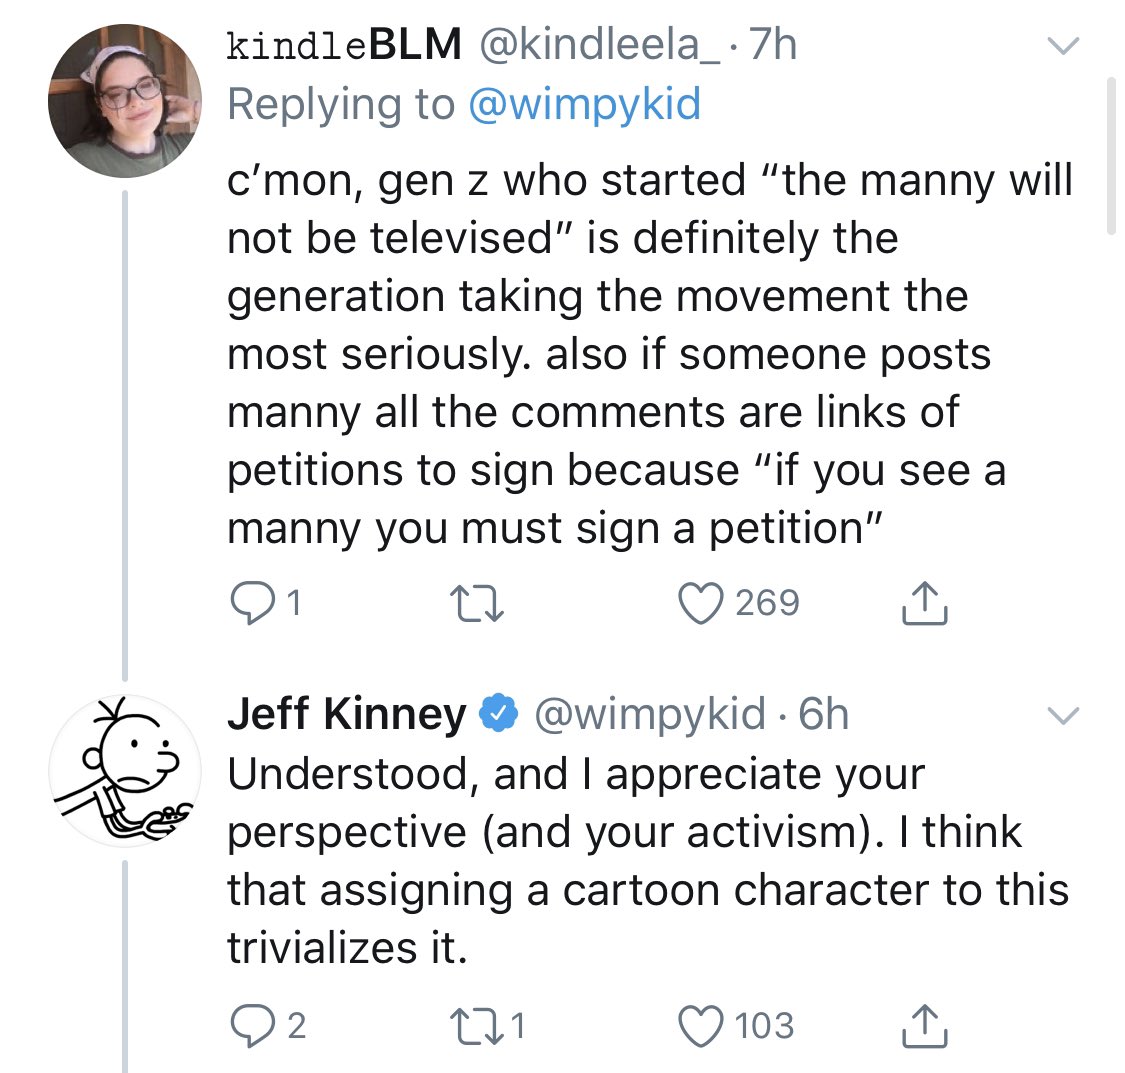 angle - kindleBLM 7h c'mon, gen z who started "the manny will not be televised" is definitely the generation taking the movement the most seriously. also if someone posts manny all the are links of petitions to sign because "if you see a manny you must si